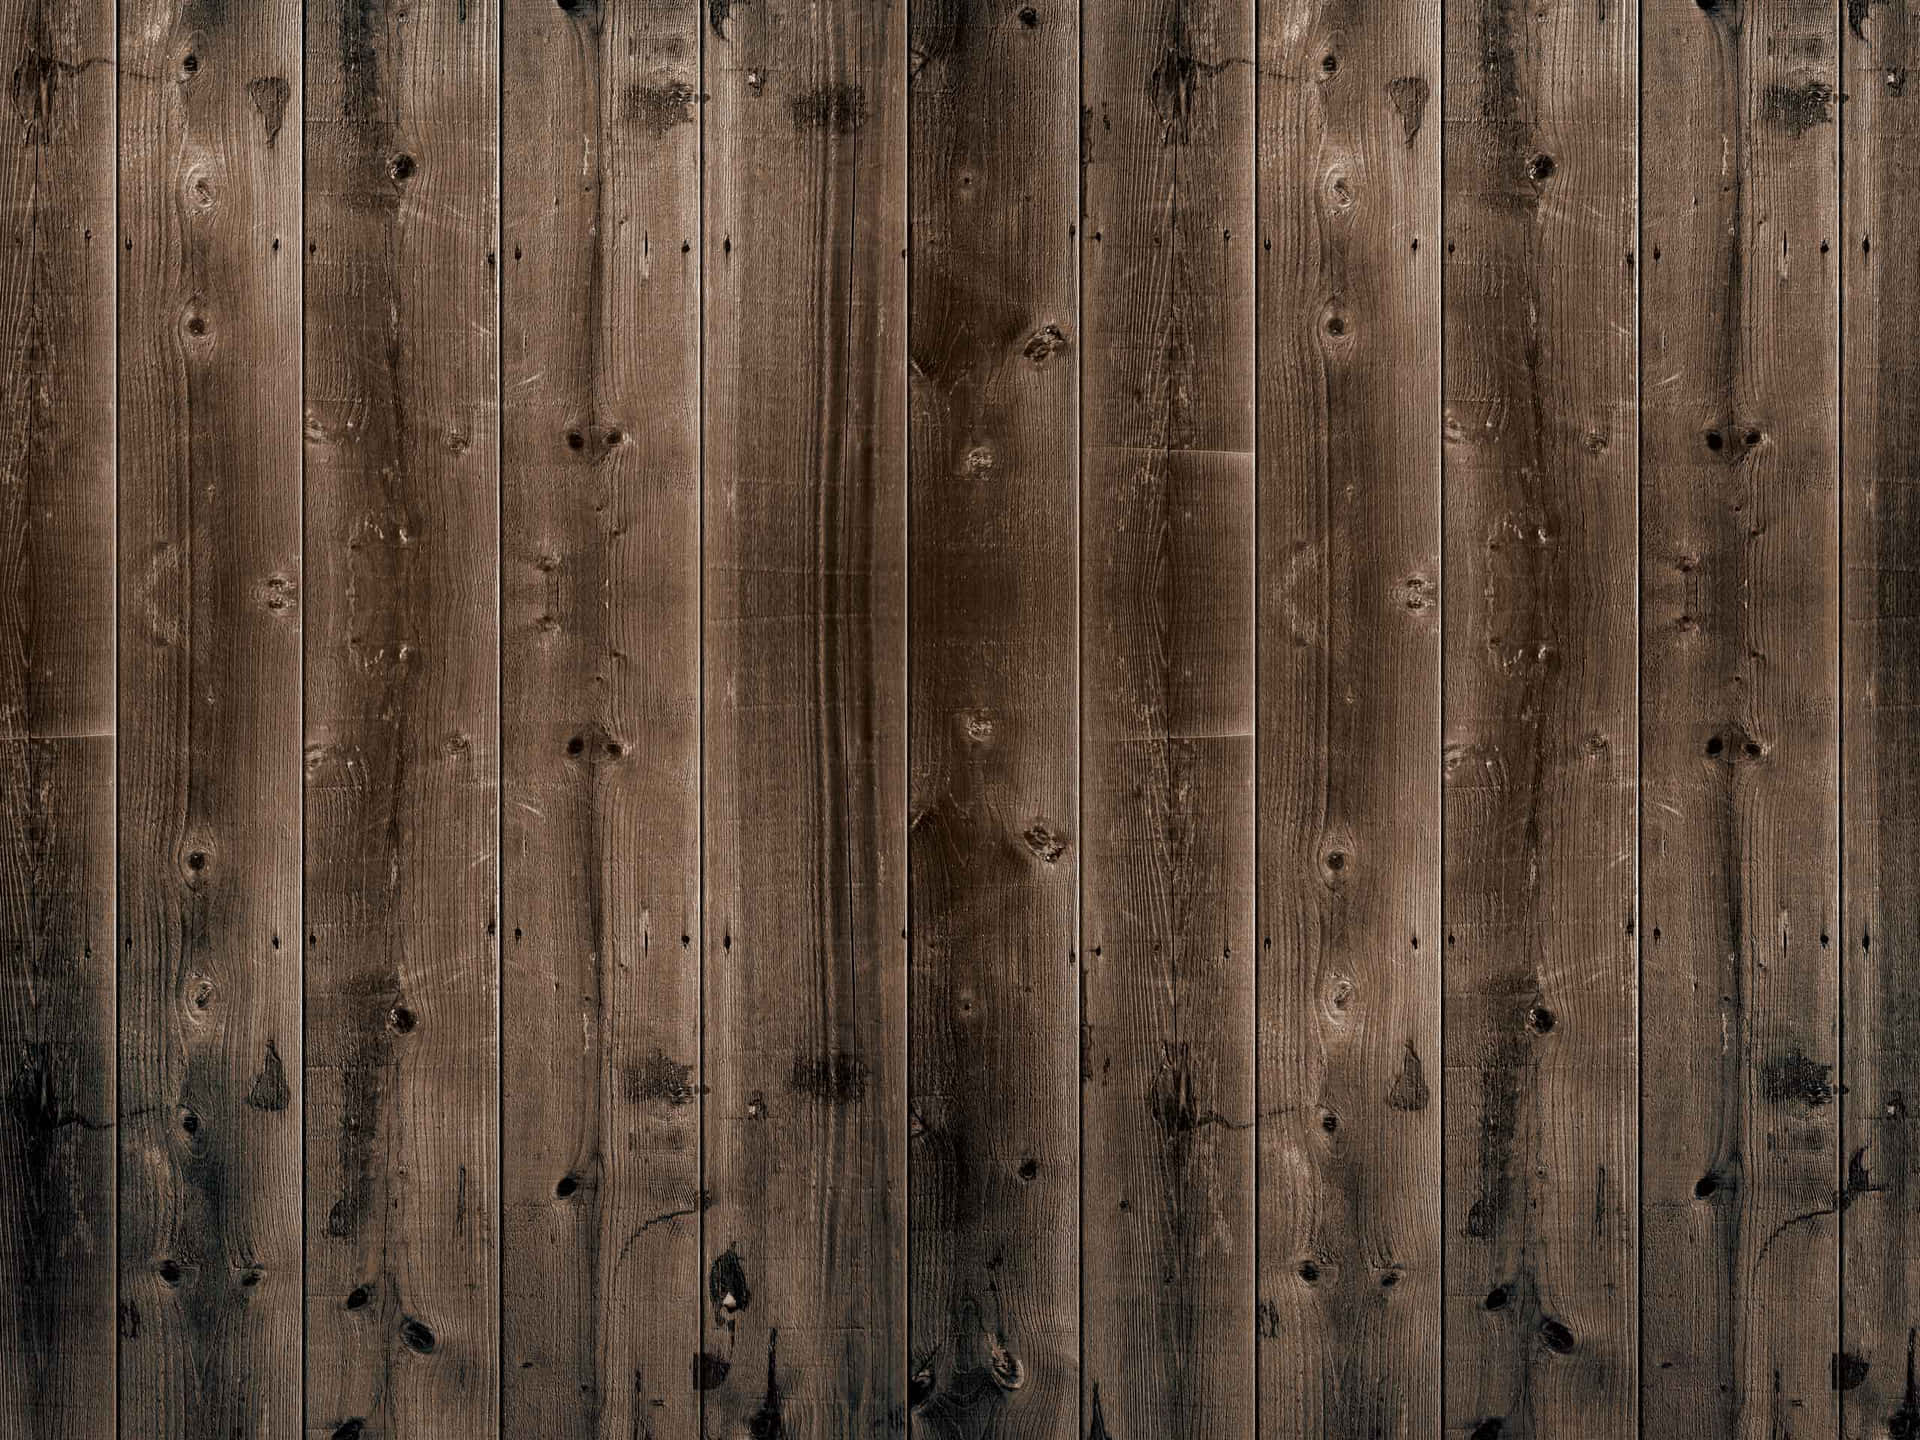 Warm and Homely Rustic Wood Background